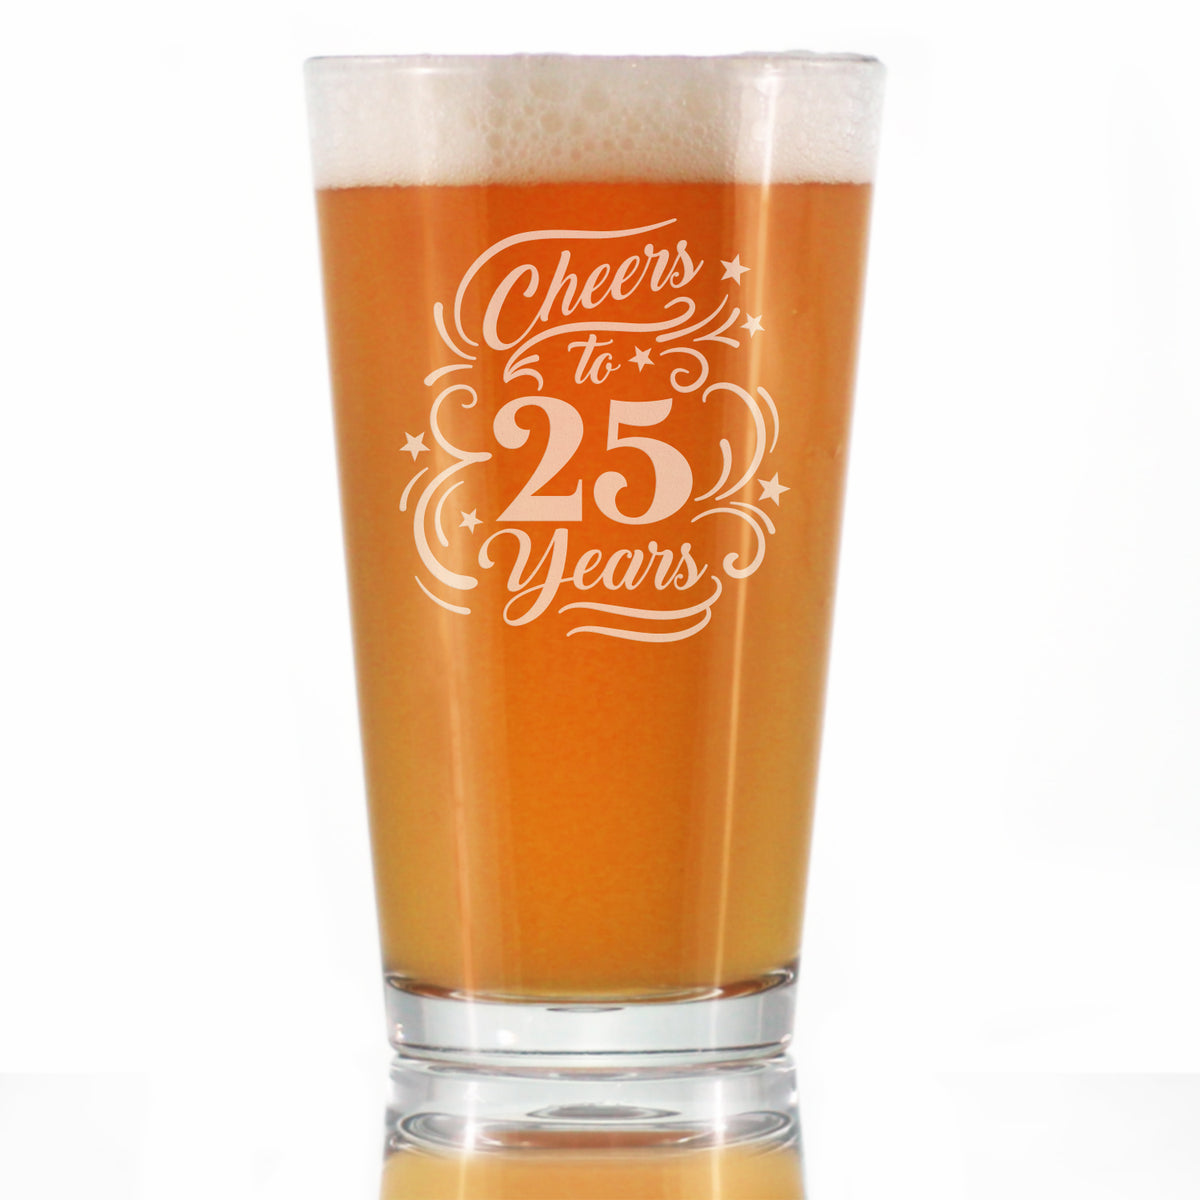 Cheers to 25 Years - Pint Glass for Beer - Gifts for Women &amp; Men - 25th Anniversary Party Decor - 16 Oz Glasses